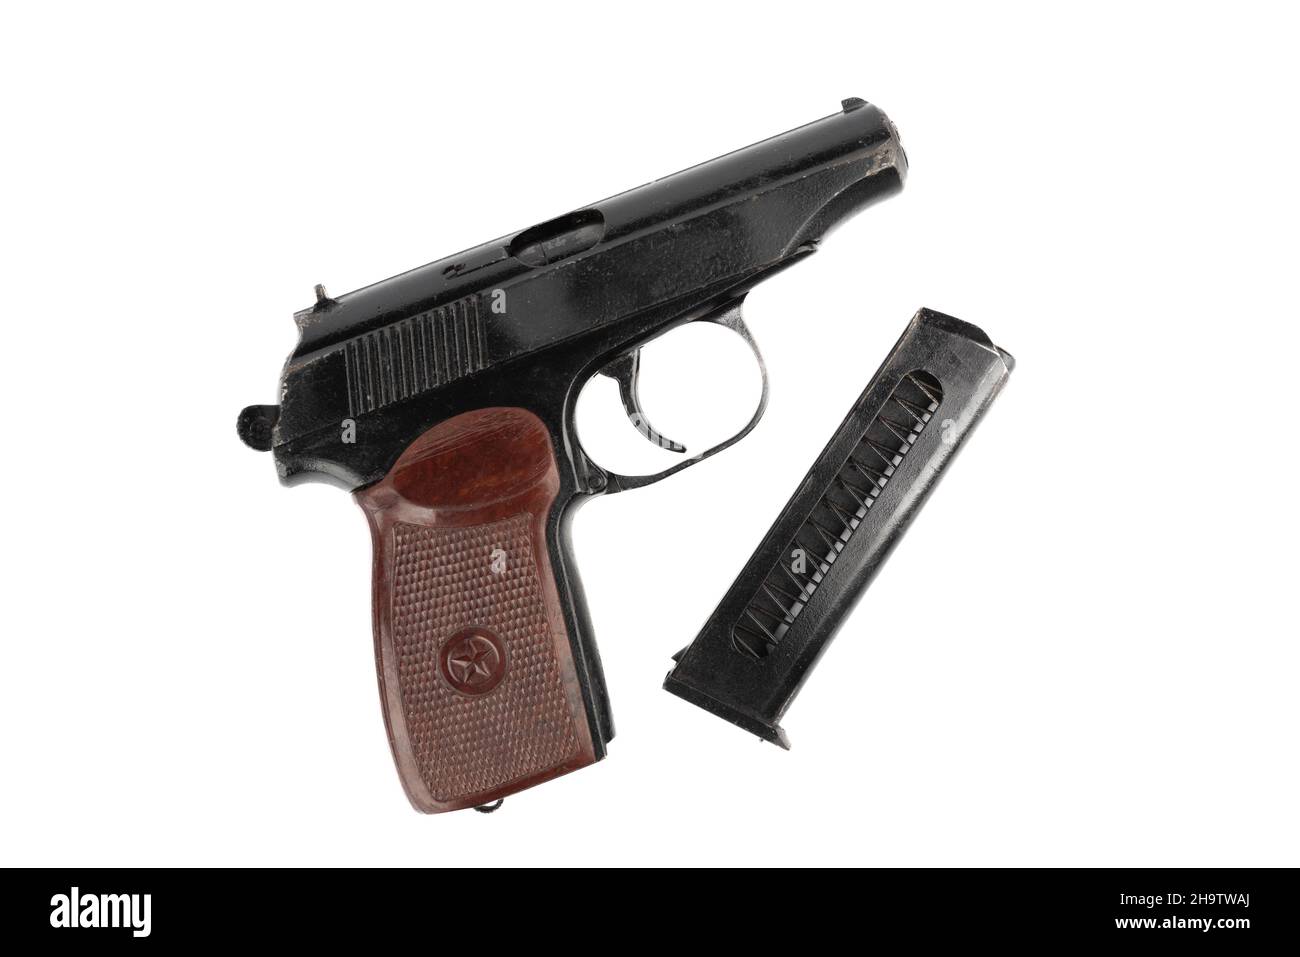 Top view of a Makarov pistol and a separate magazine for cartridges. Makarov pistol on a white background. Stock Photo